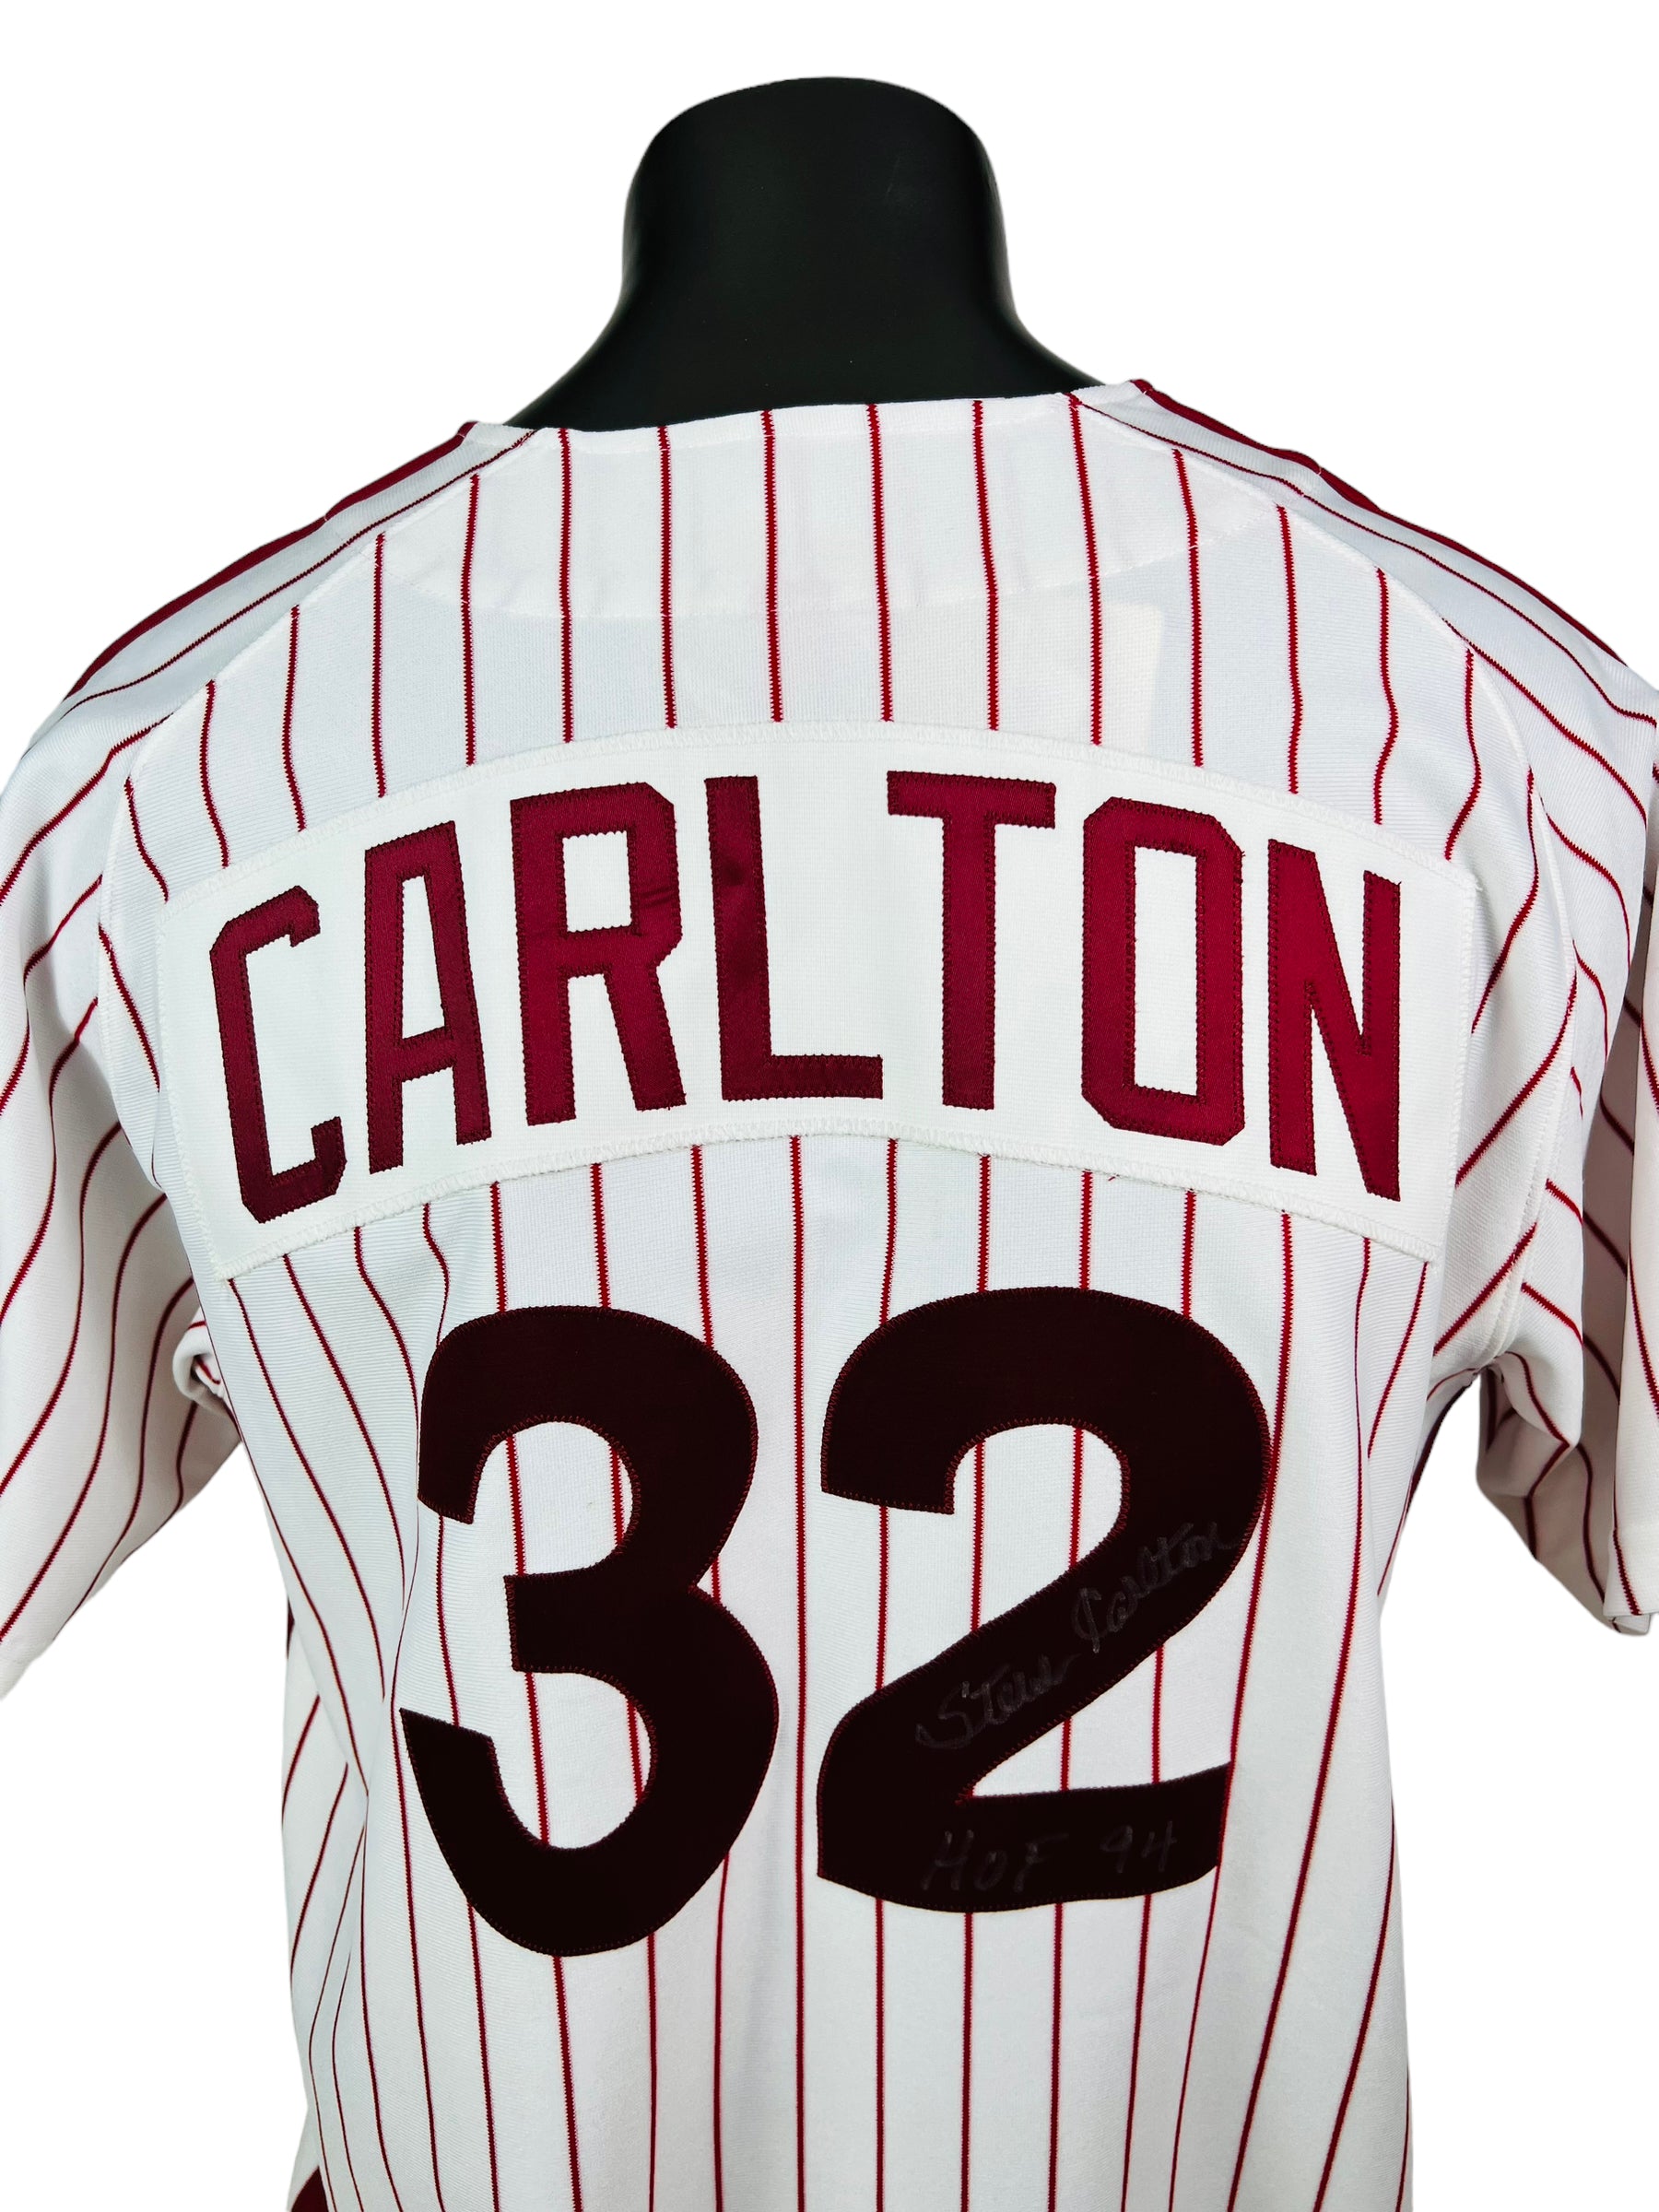 Mitchell Ness 1976 Steve Carlton Philadelphia Cooperstown Collection Jersey